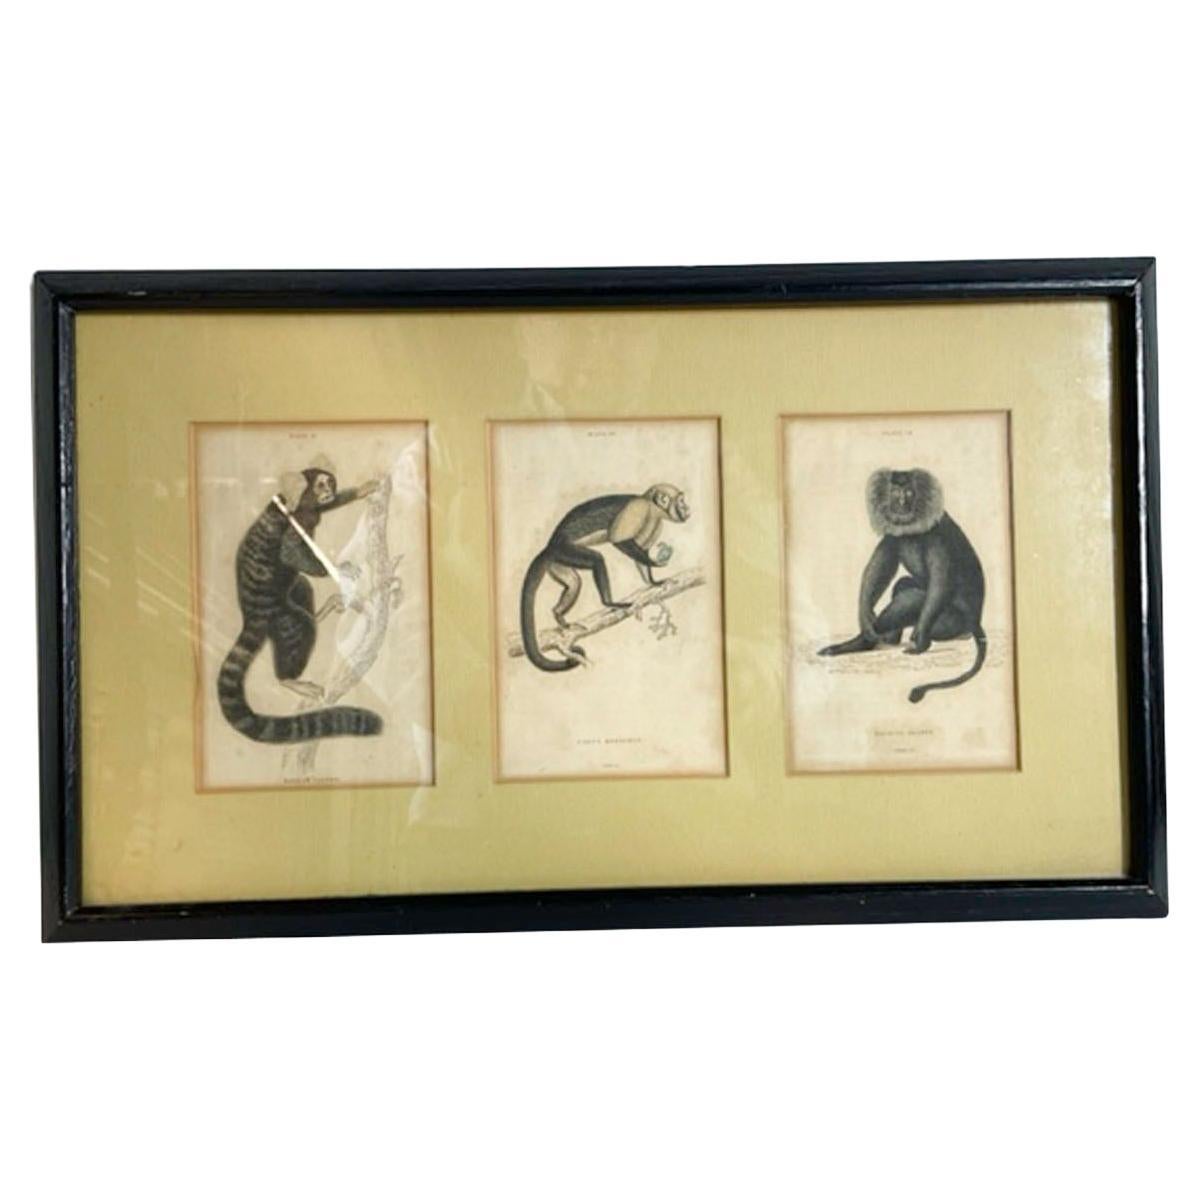 Three 18th/19th C. Hand-Colored Engravings of Monkeys Matted and Framed Together For Sale